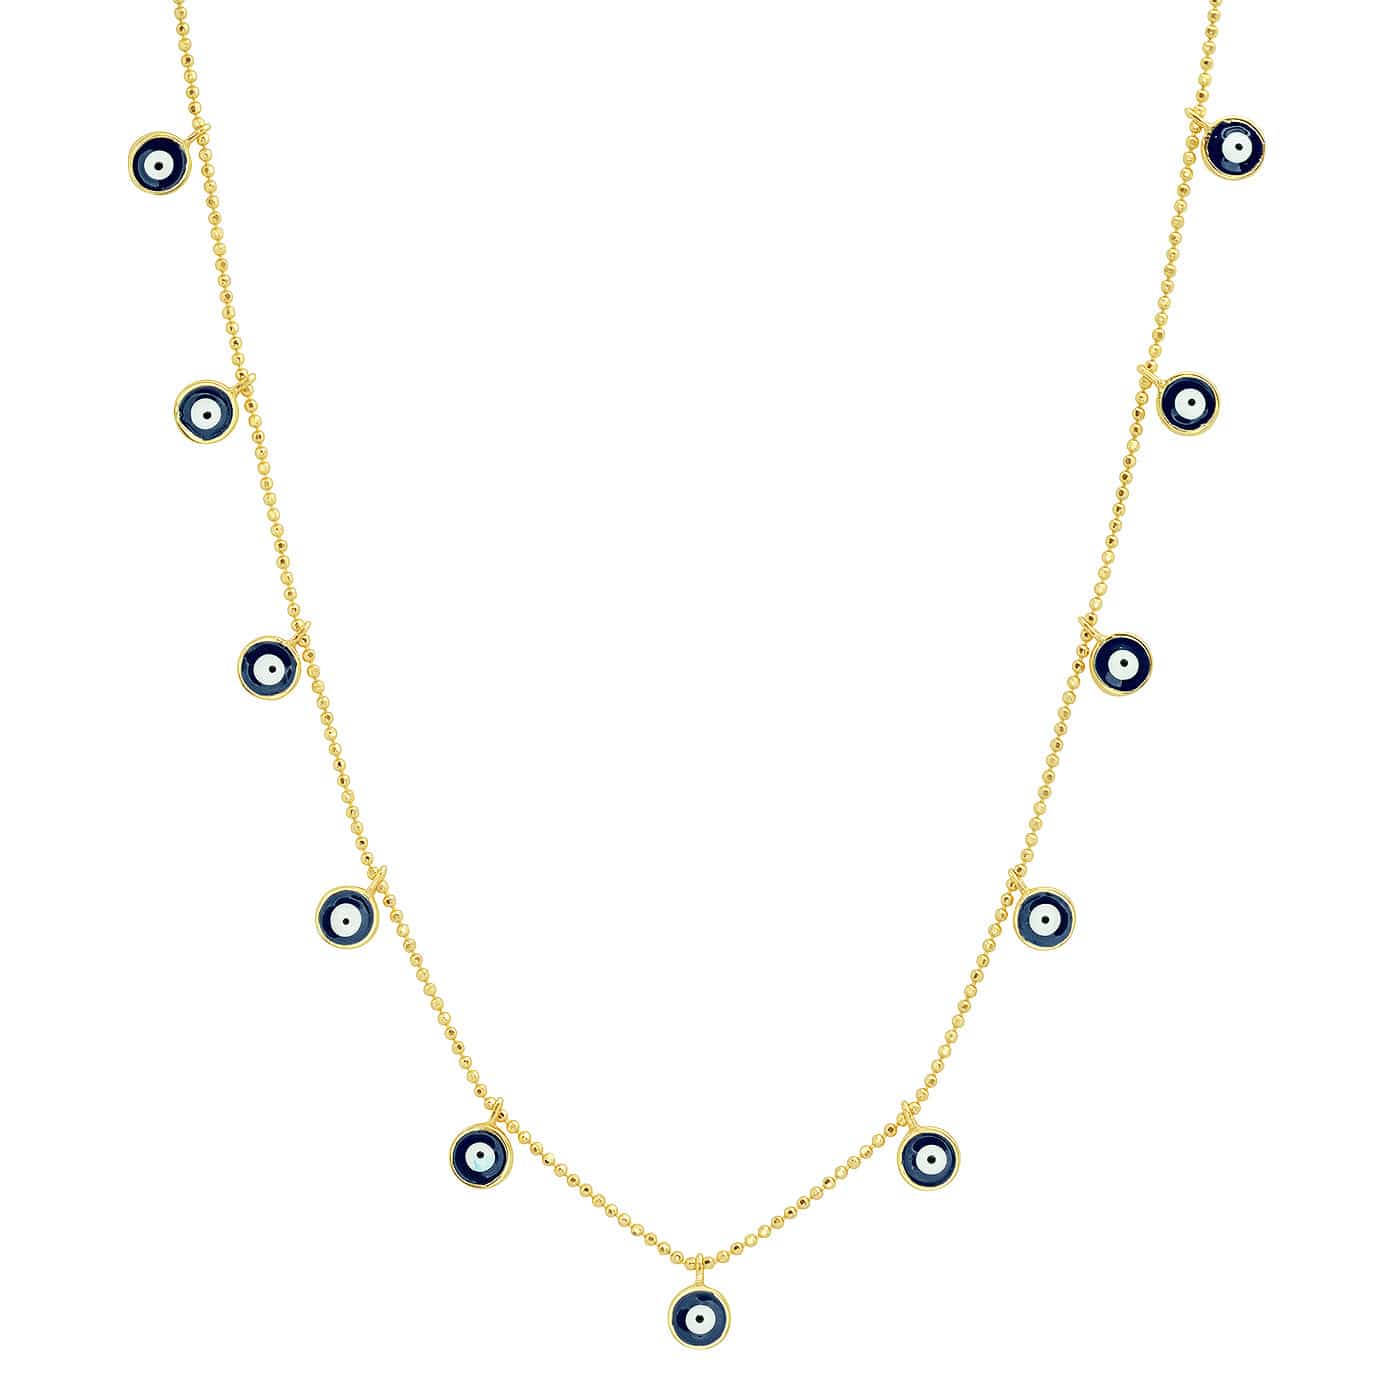 TAI JEWELRY Necklace Gold Necklace With Evil Eye Dangles